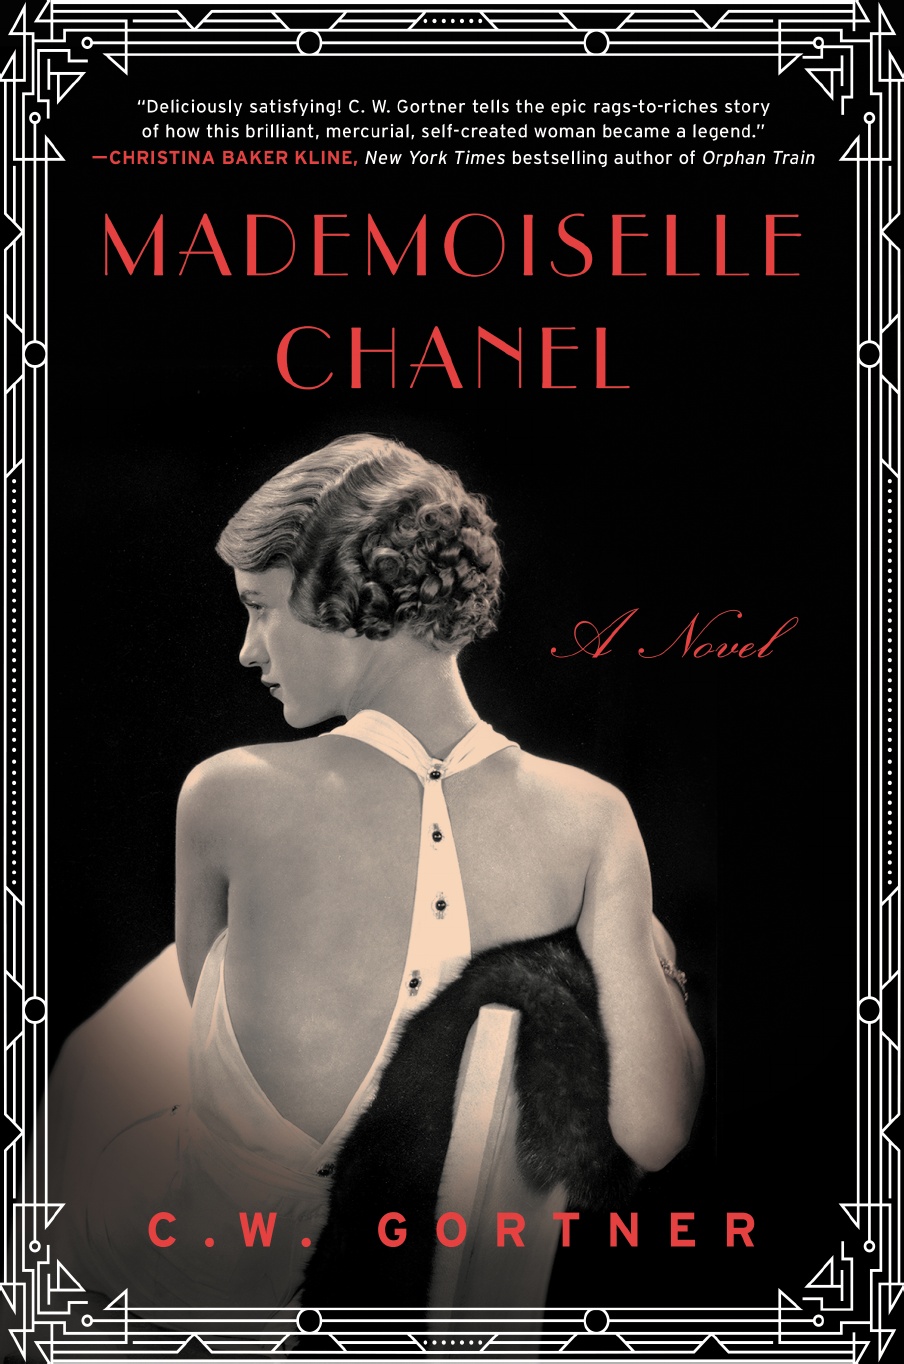 Mademoiselle Chanel by C.W. Gortner – Book Blast and Giveaway